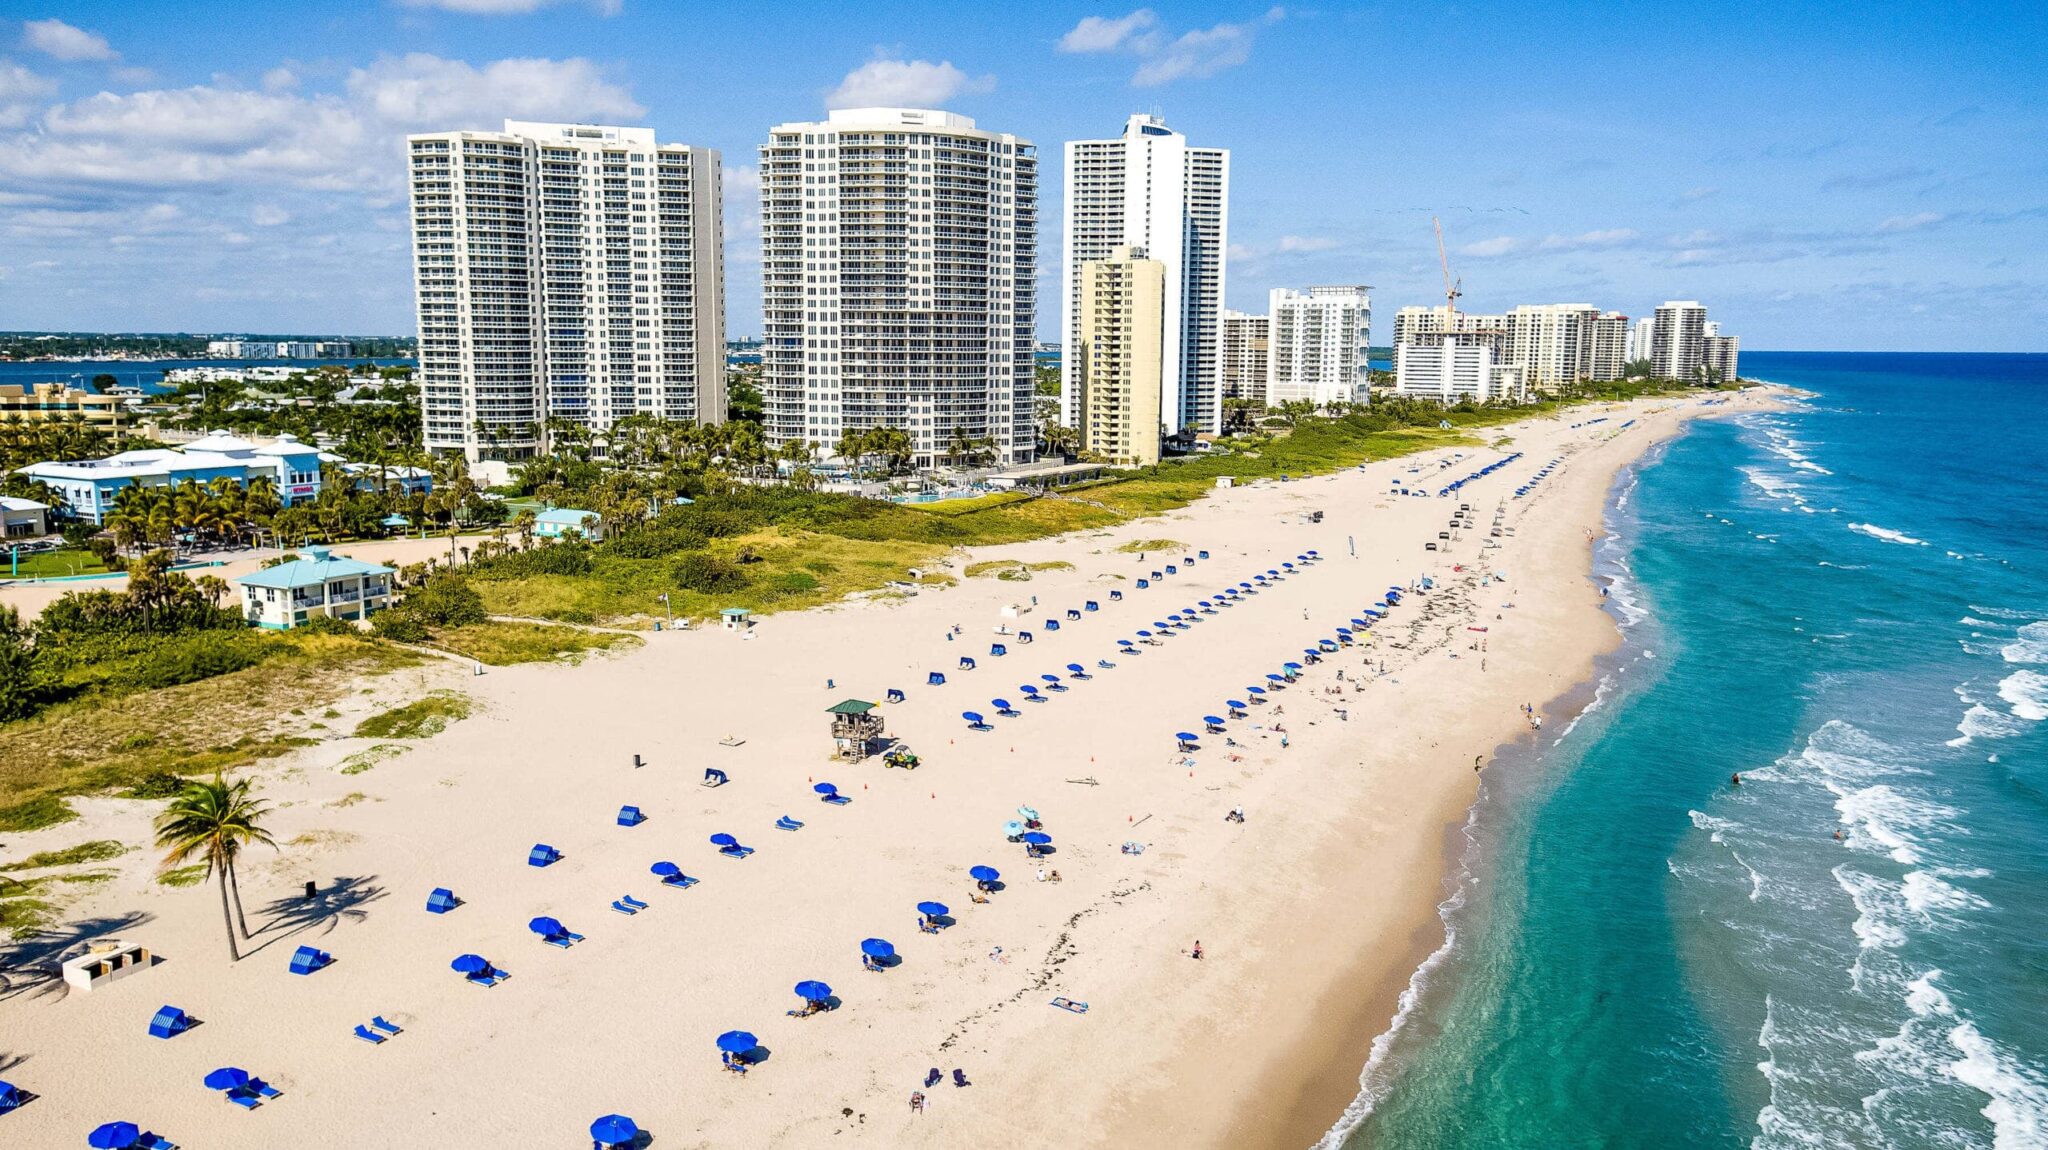 The Best Things to Do in Palm Beach, Florida 2023 - An Insider's Guide